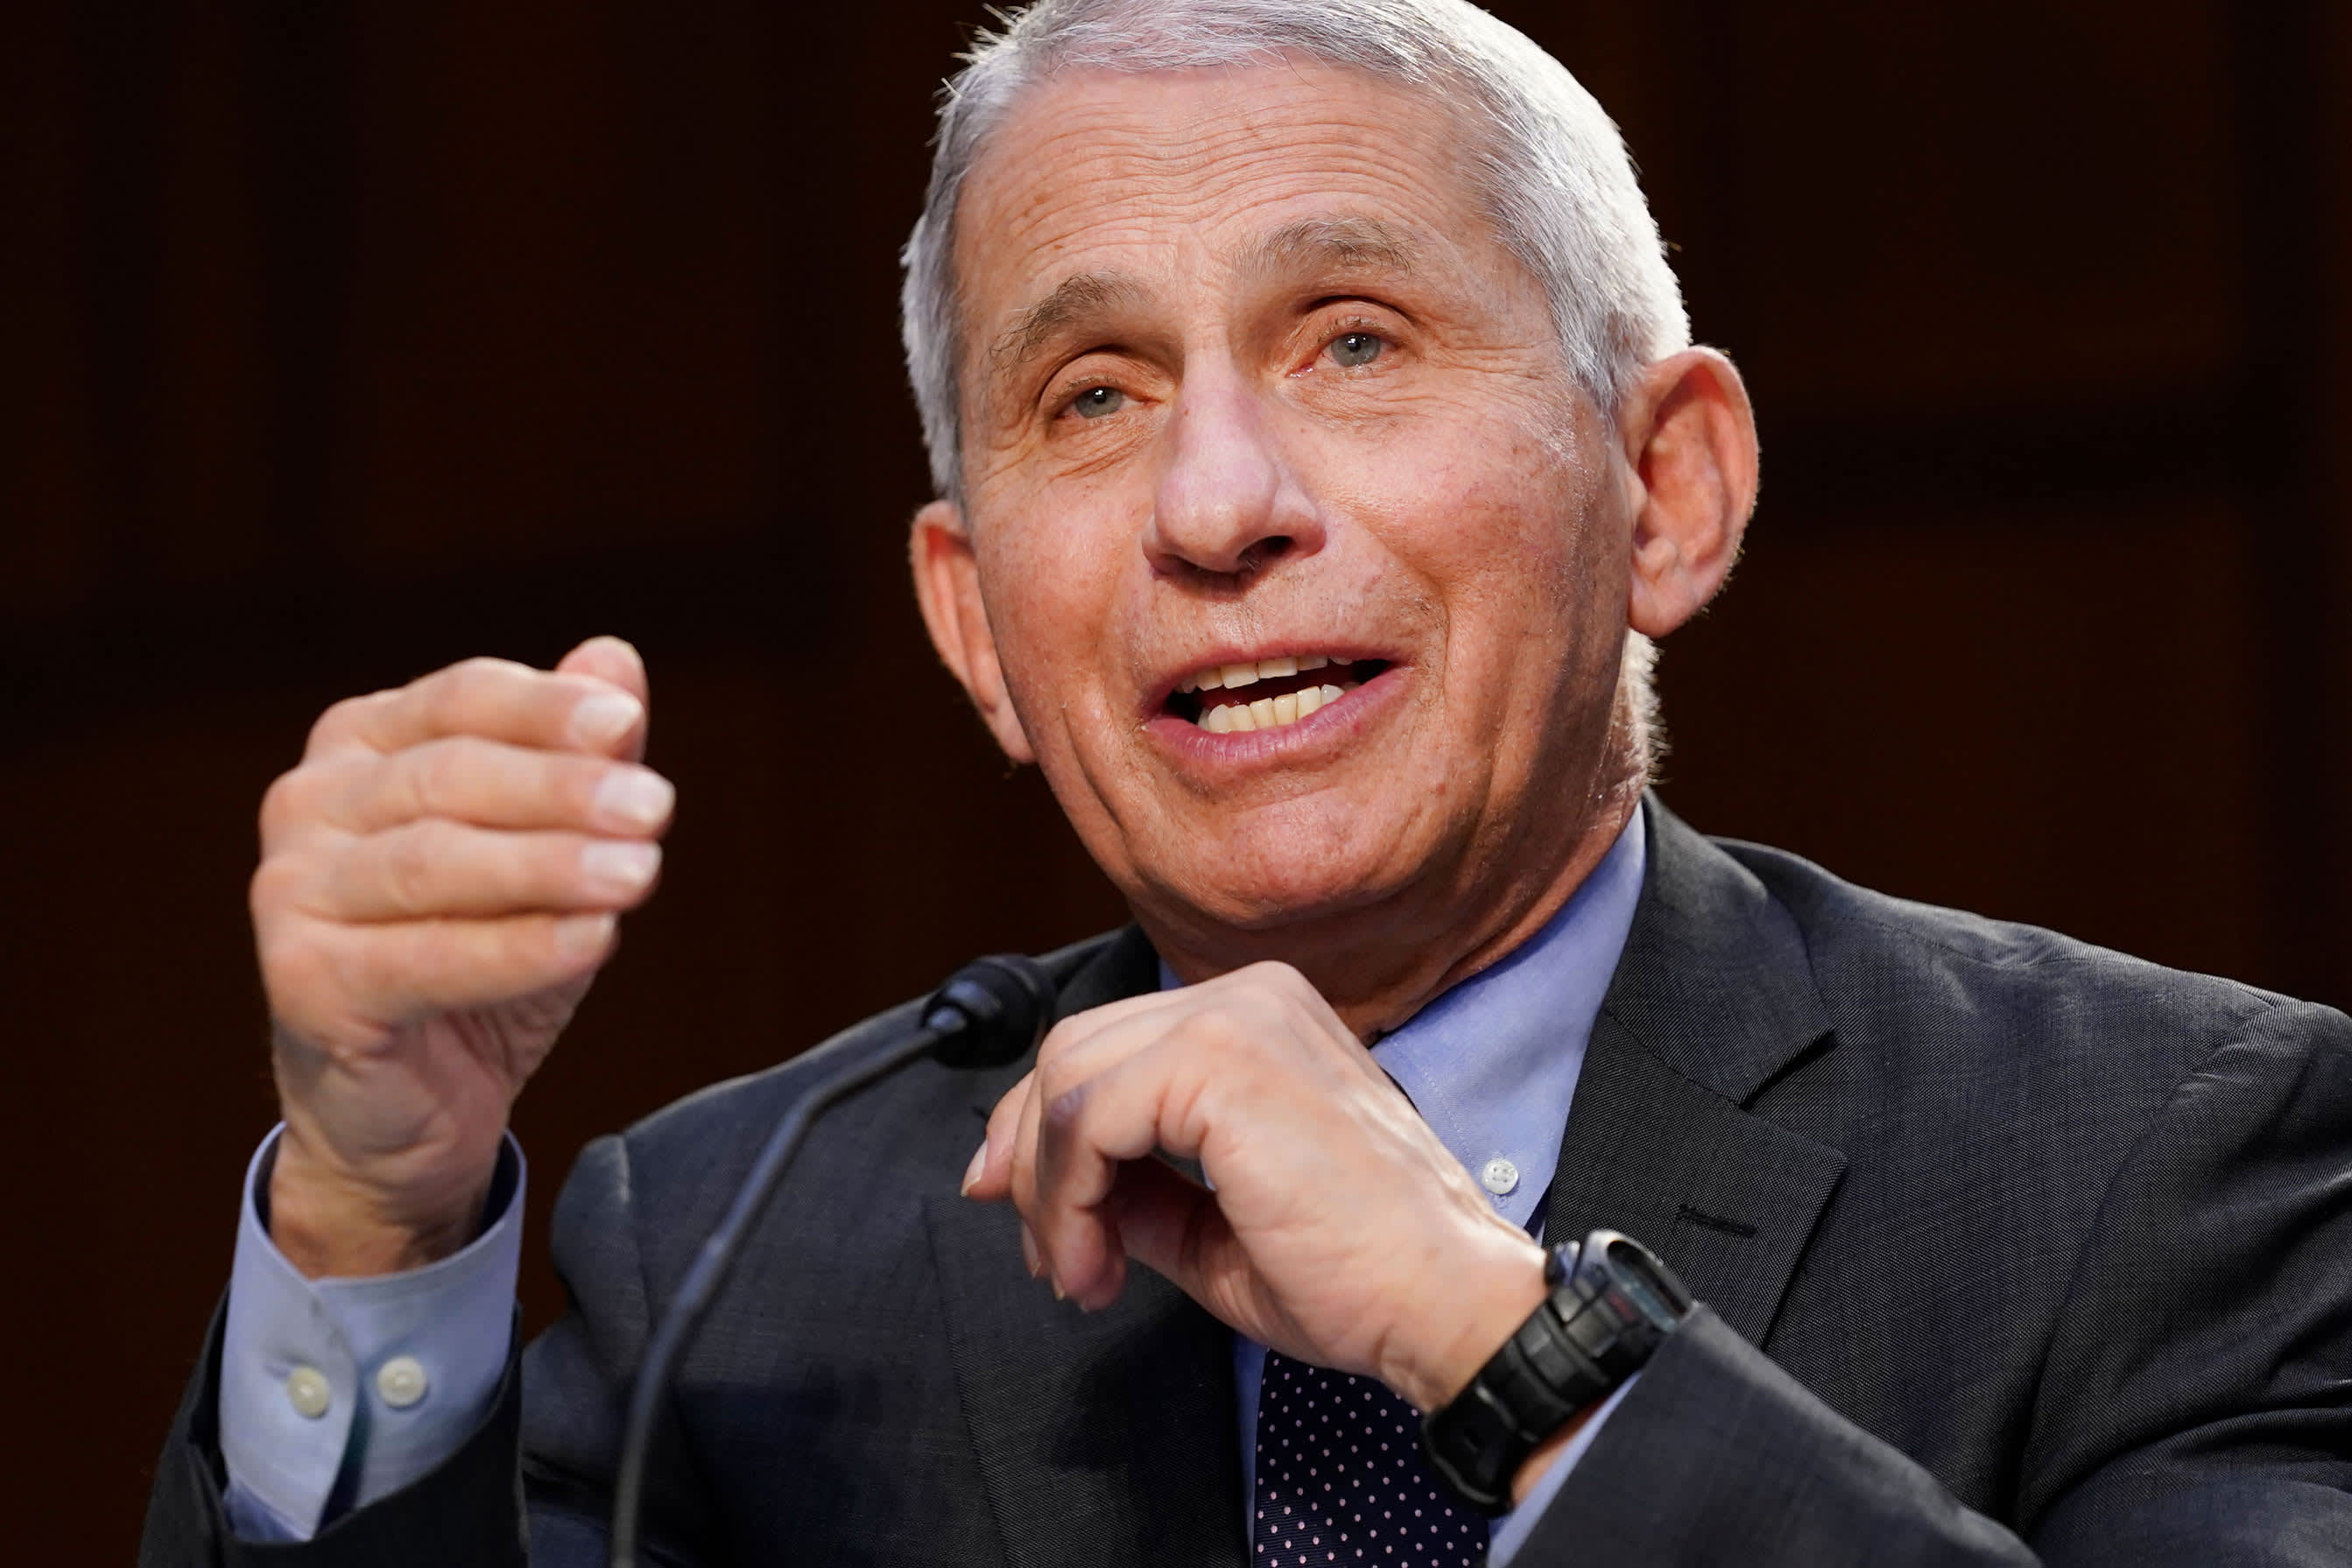 Dr. Fauci: How we'll know when we've reached herd immunity with Covid - CNBC